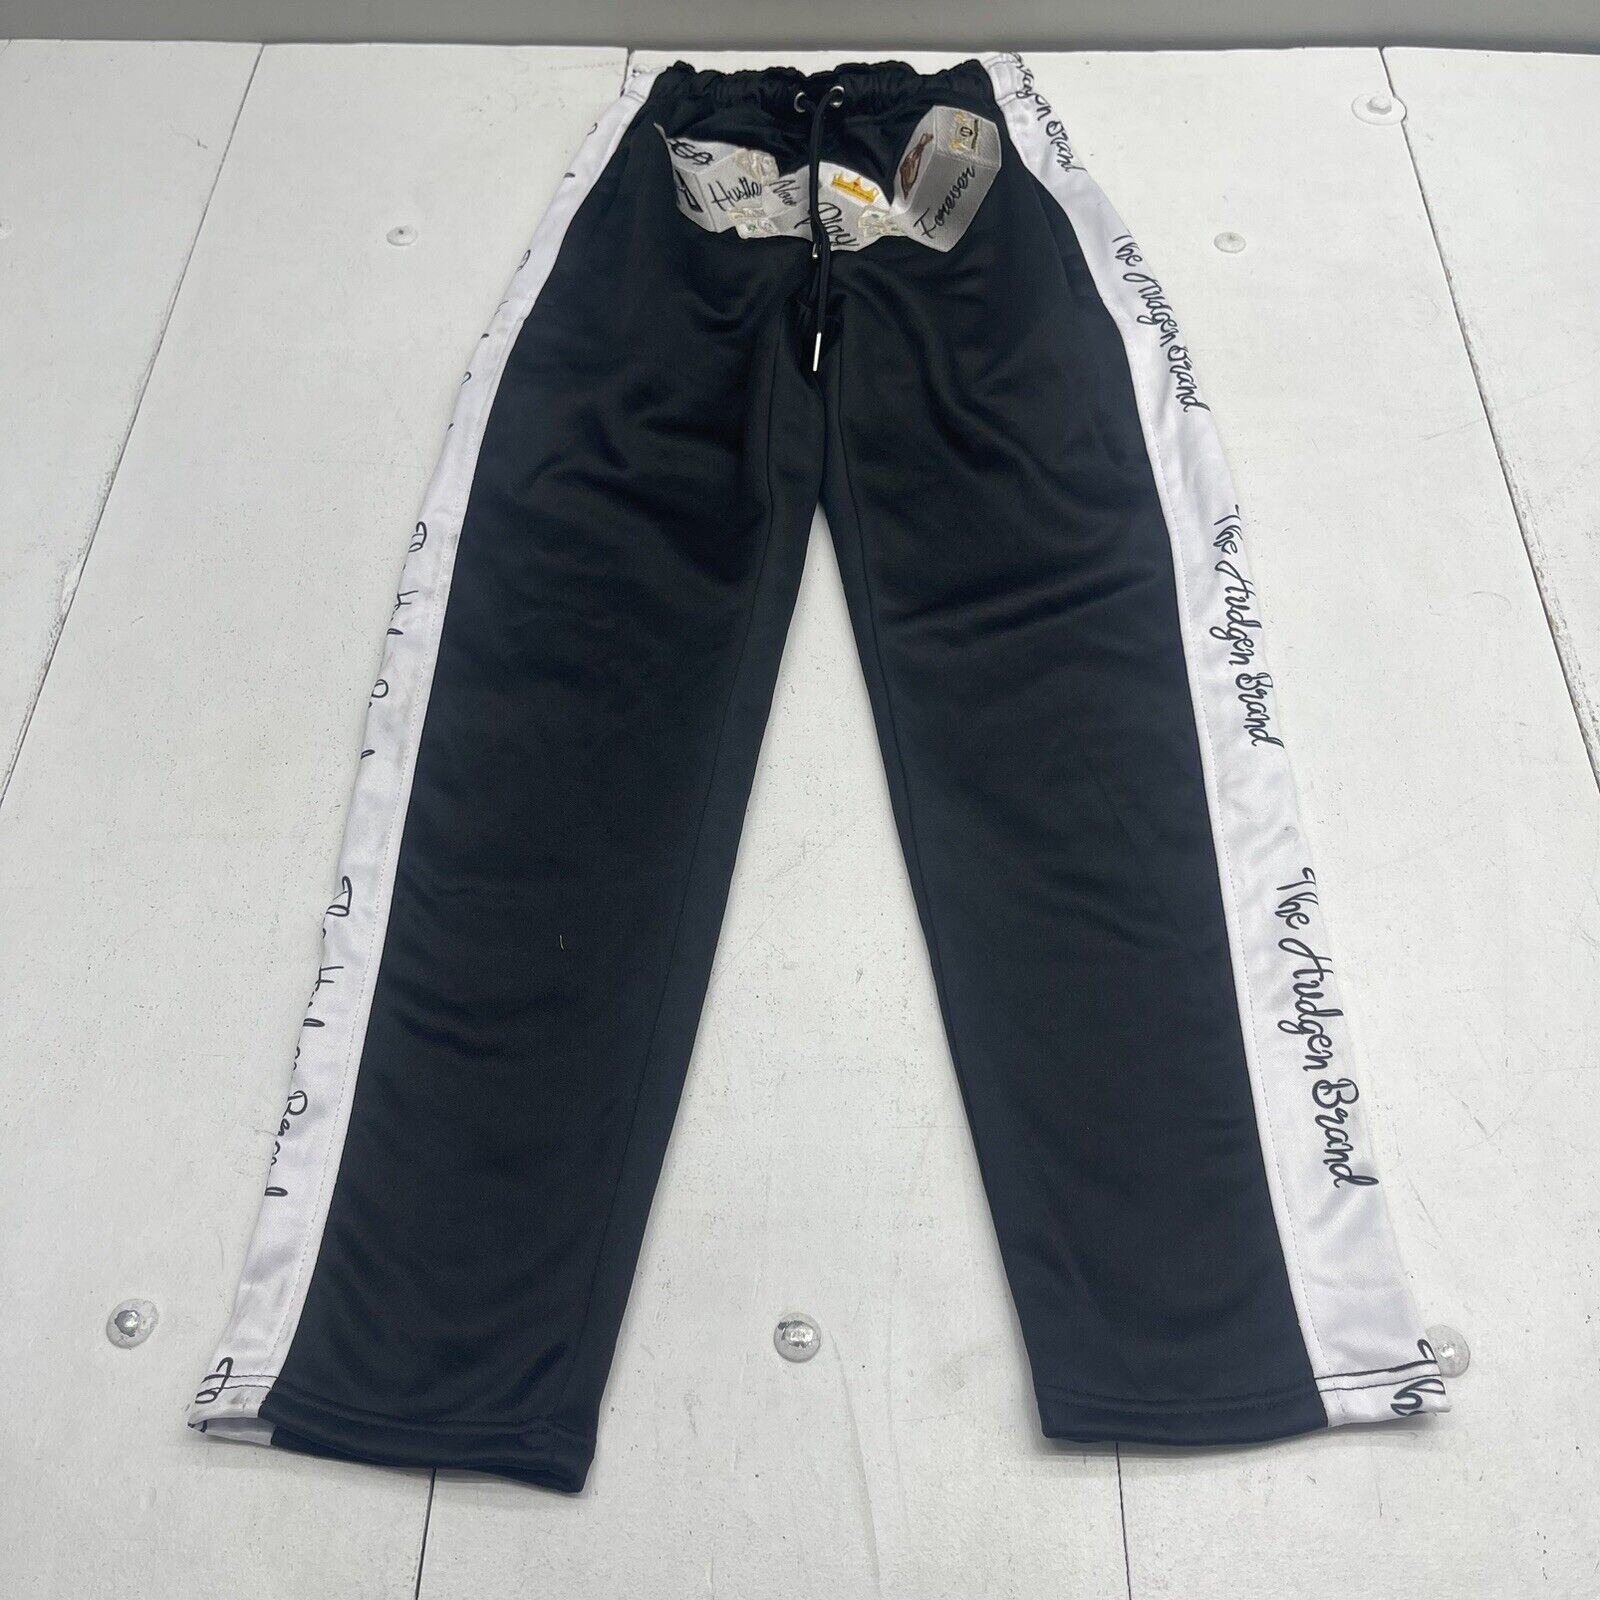 Kappa Tearaway Track Pants 🤍 only worn once for a... - Depop